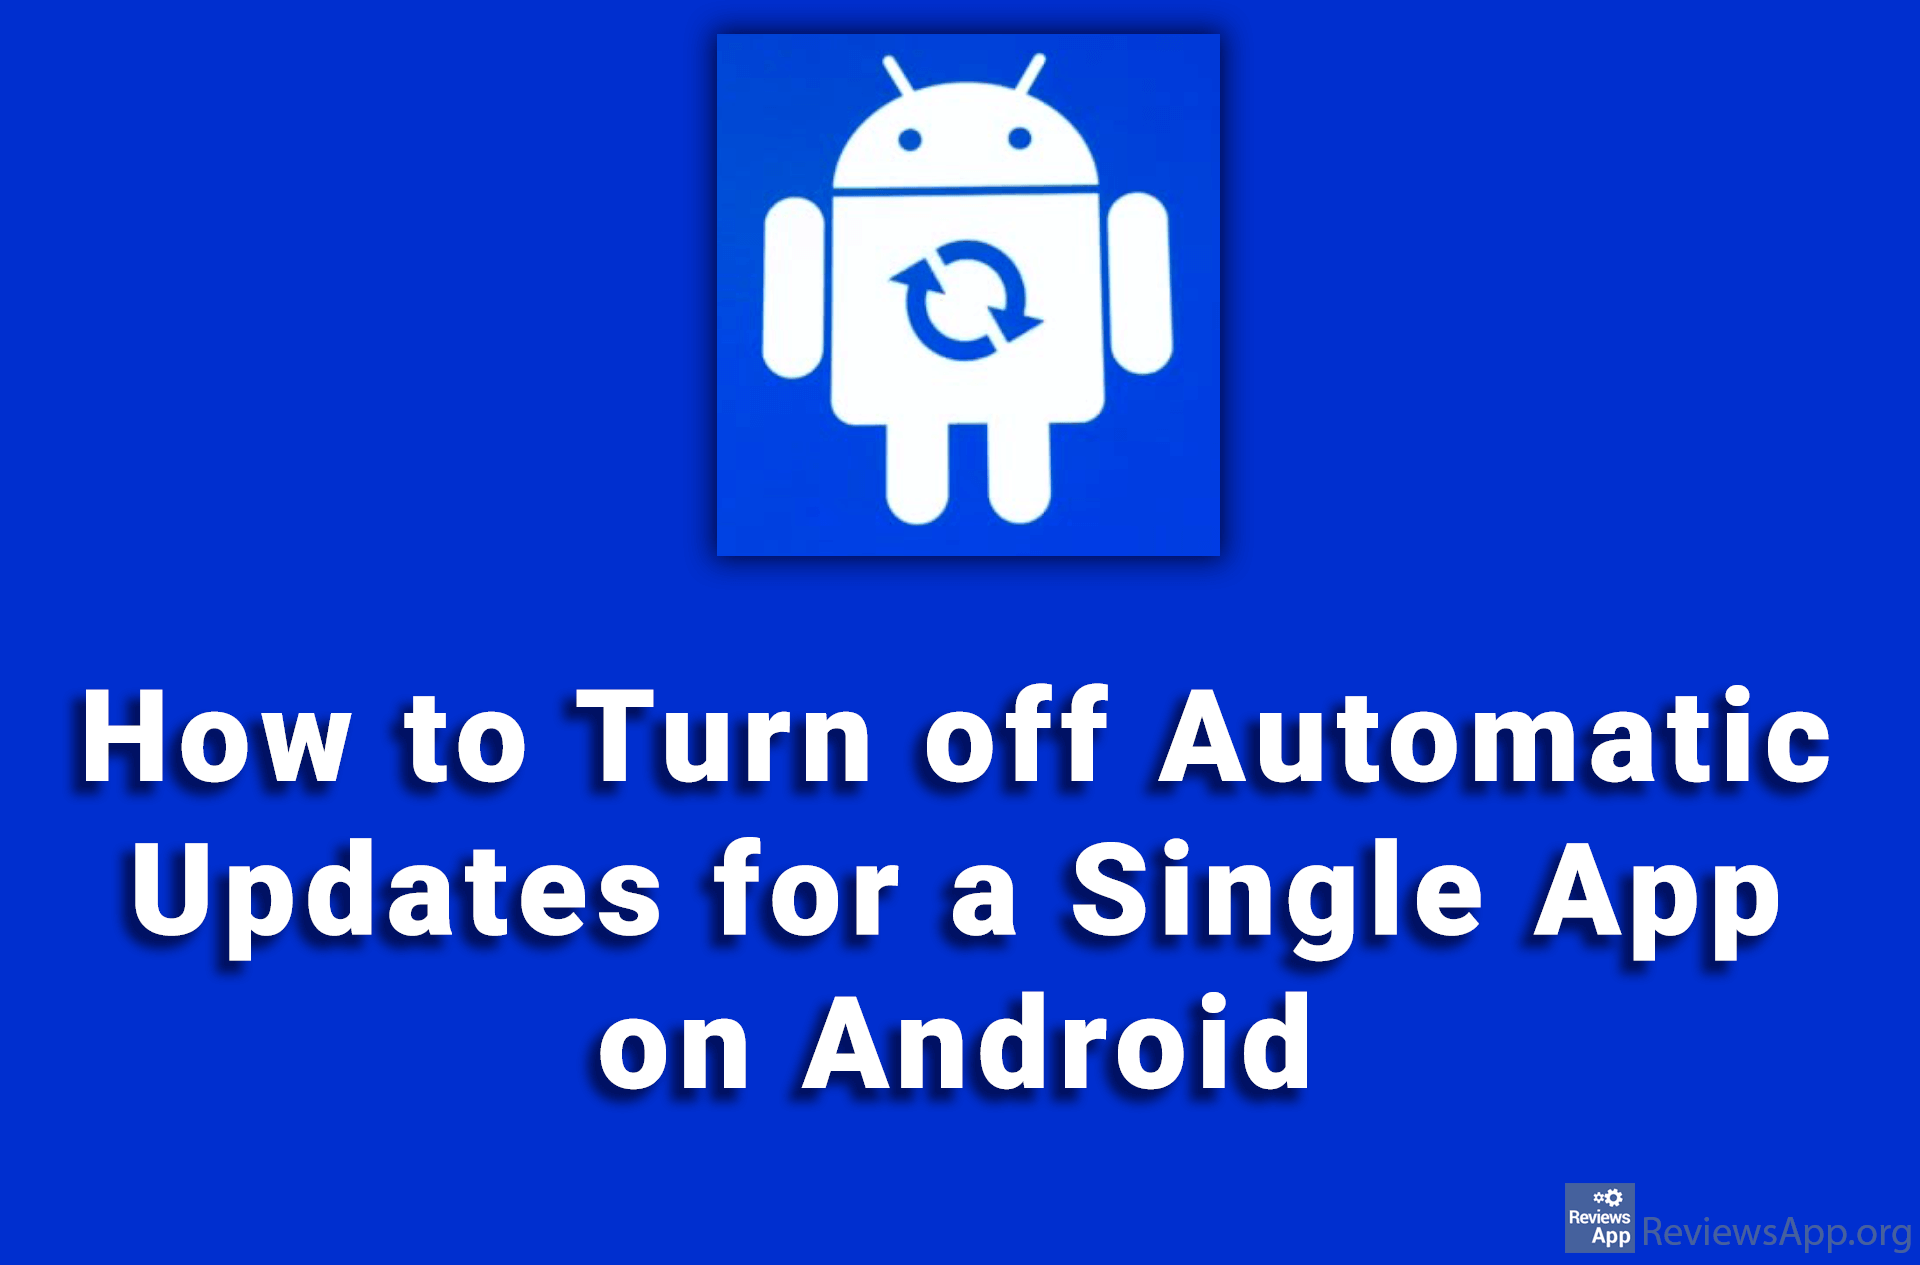 How to Turn off Automatic Updates for a Single App on Android